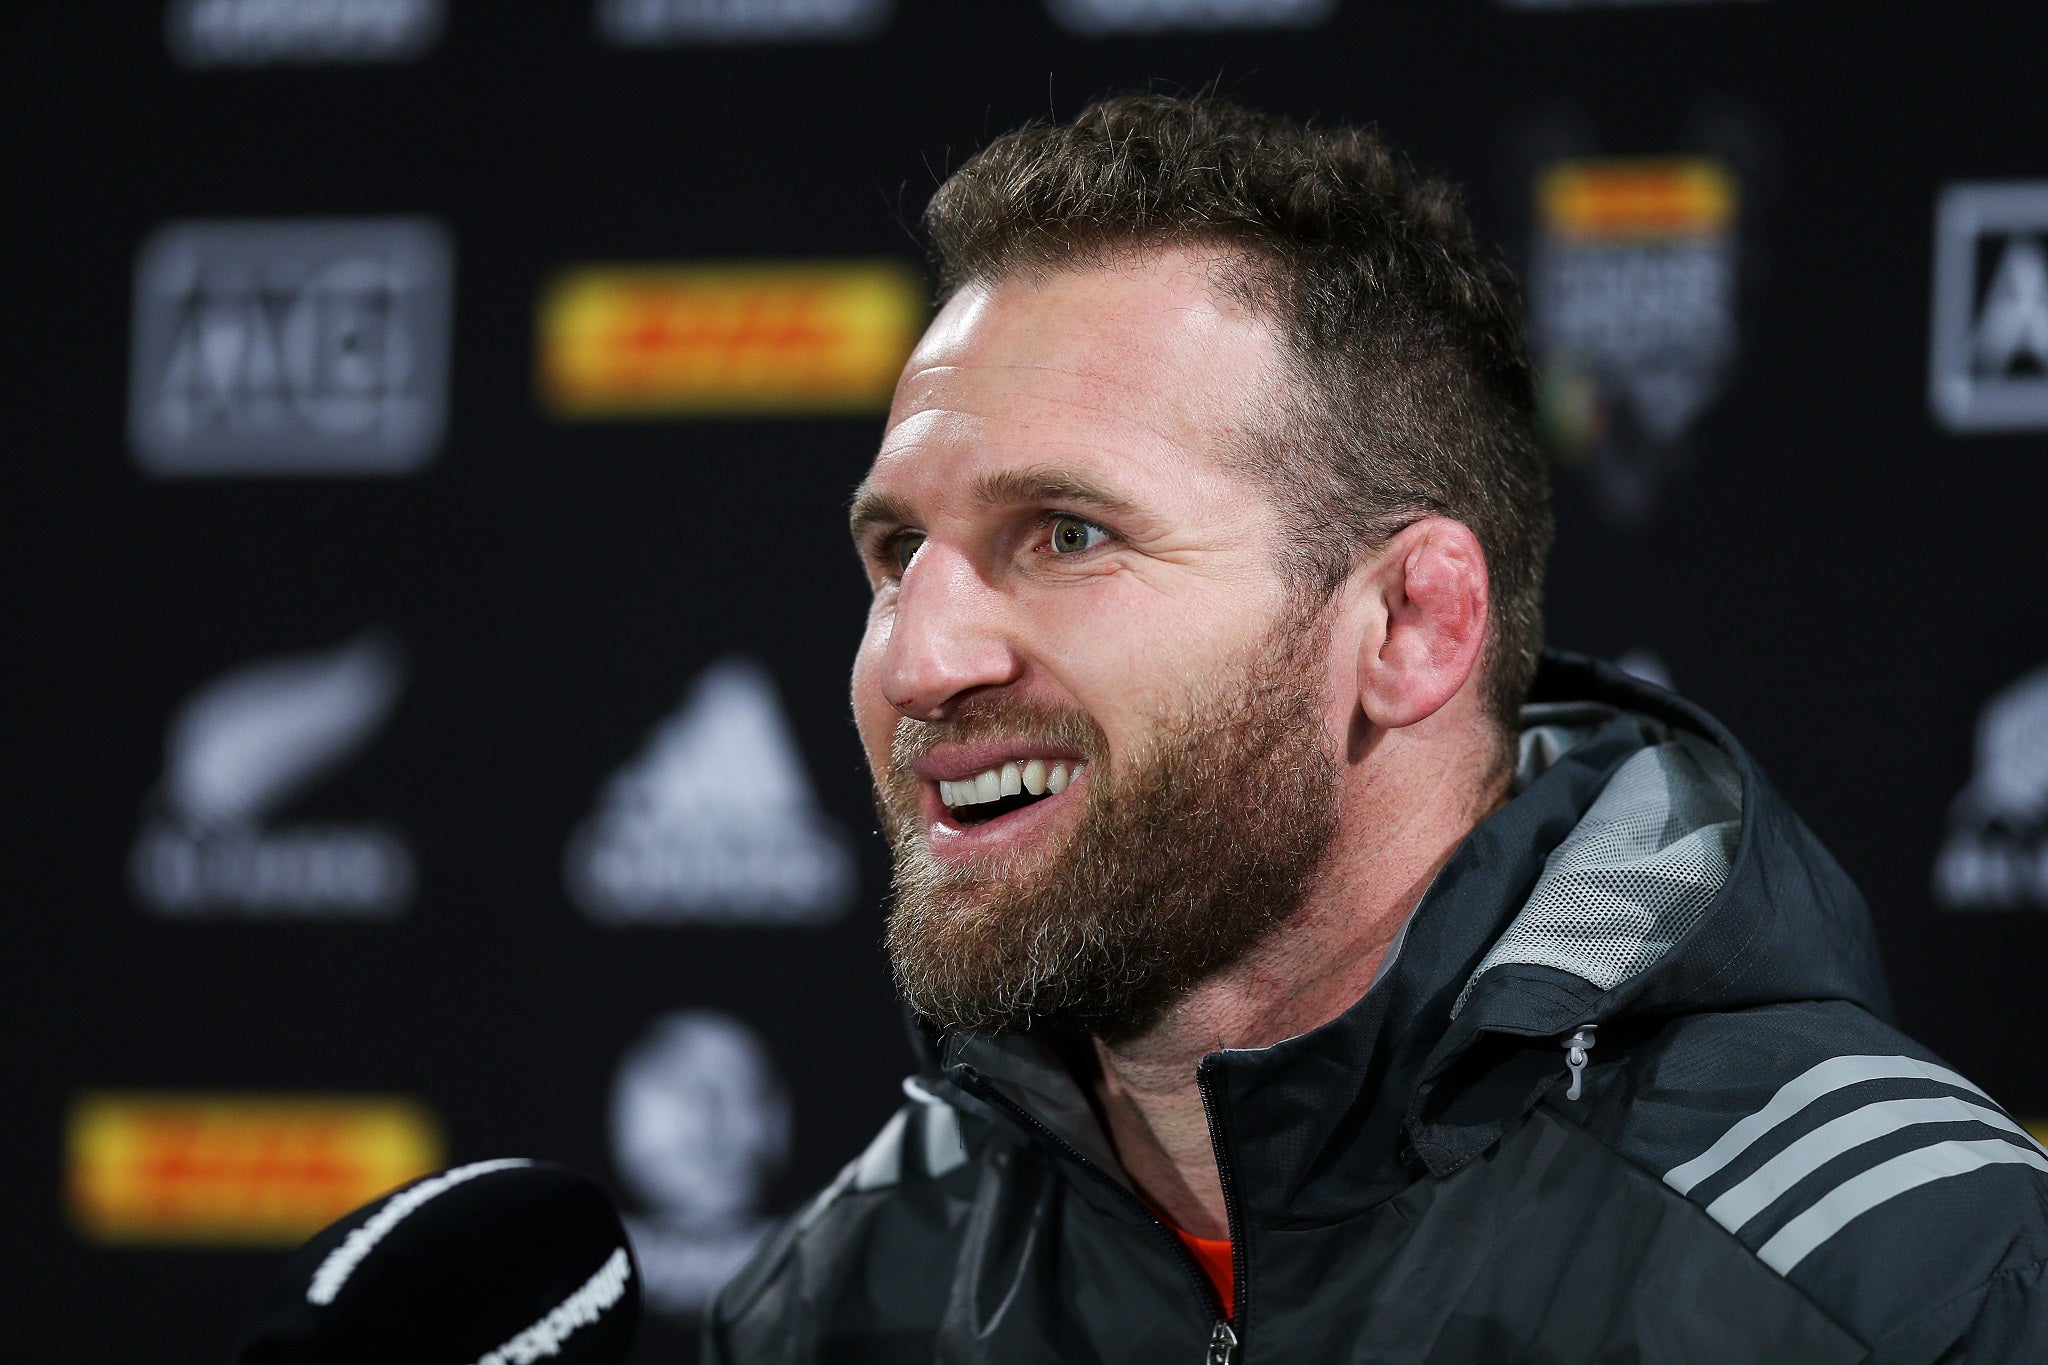 Kieran Read will win his 99th cap against the Lions in the second Test on Saturday